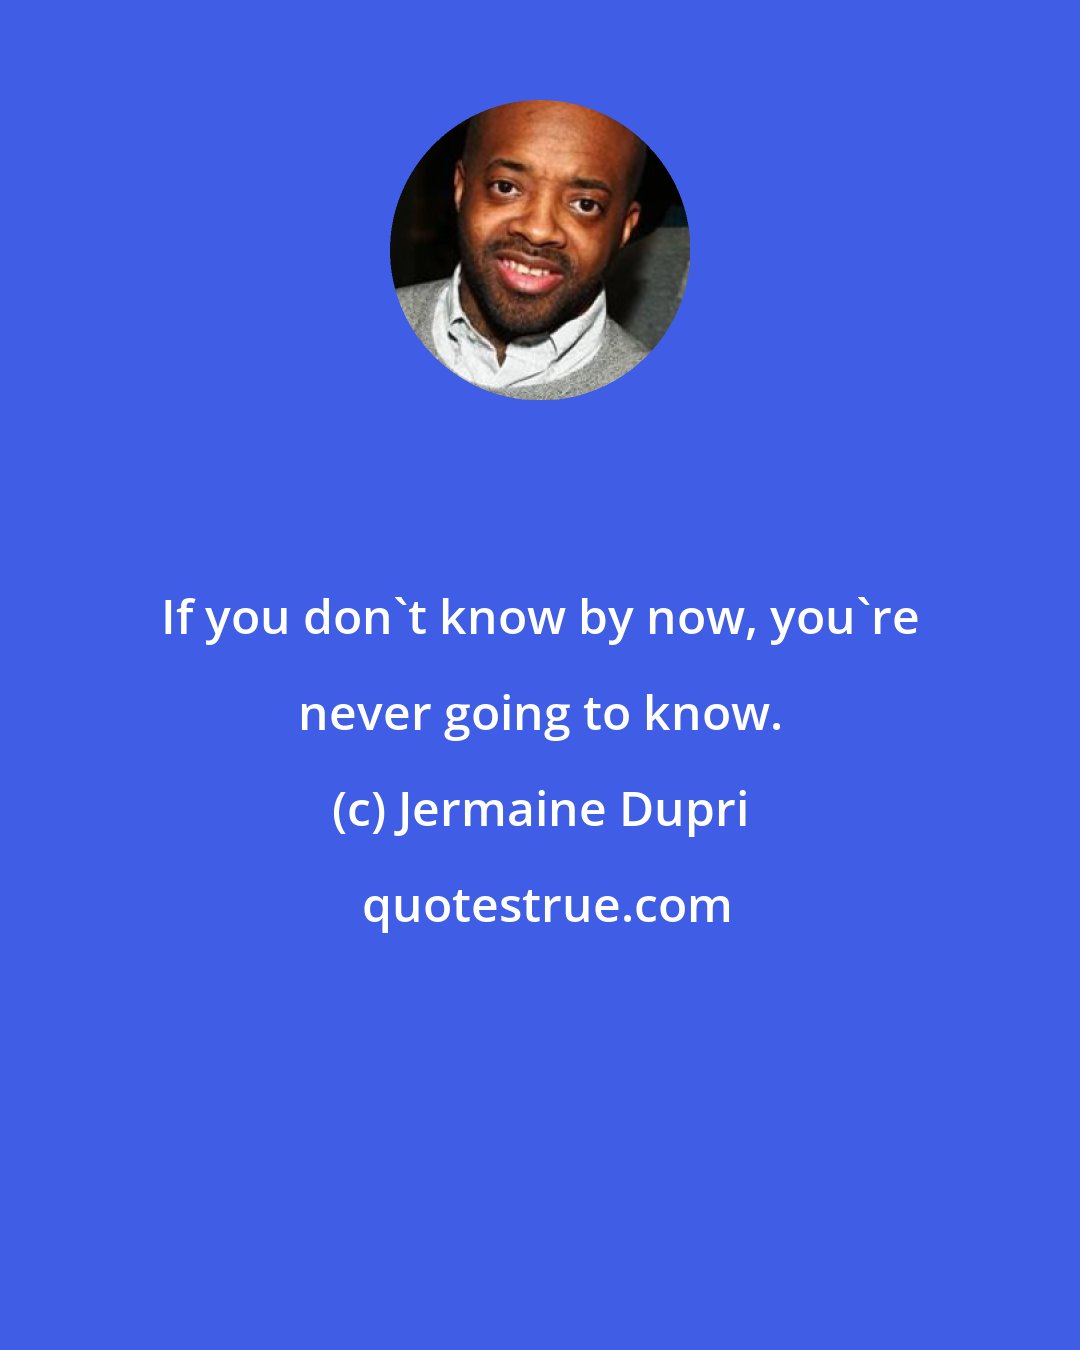 Jermaine Dupri: If you don't know by now, you're never going to know.